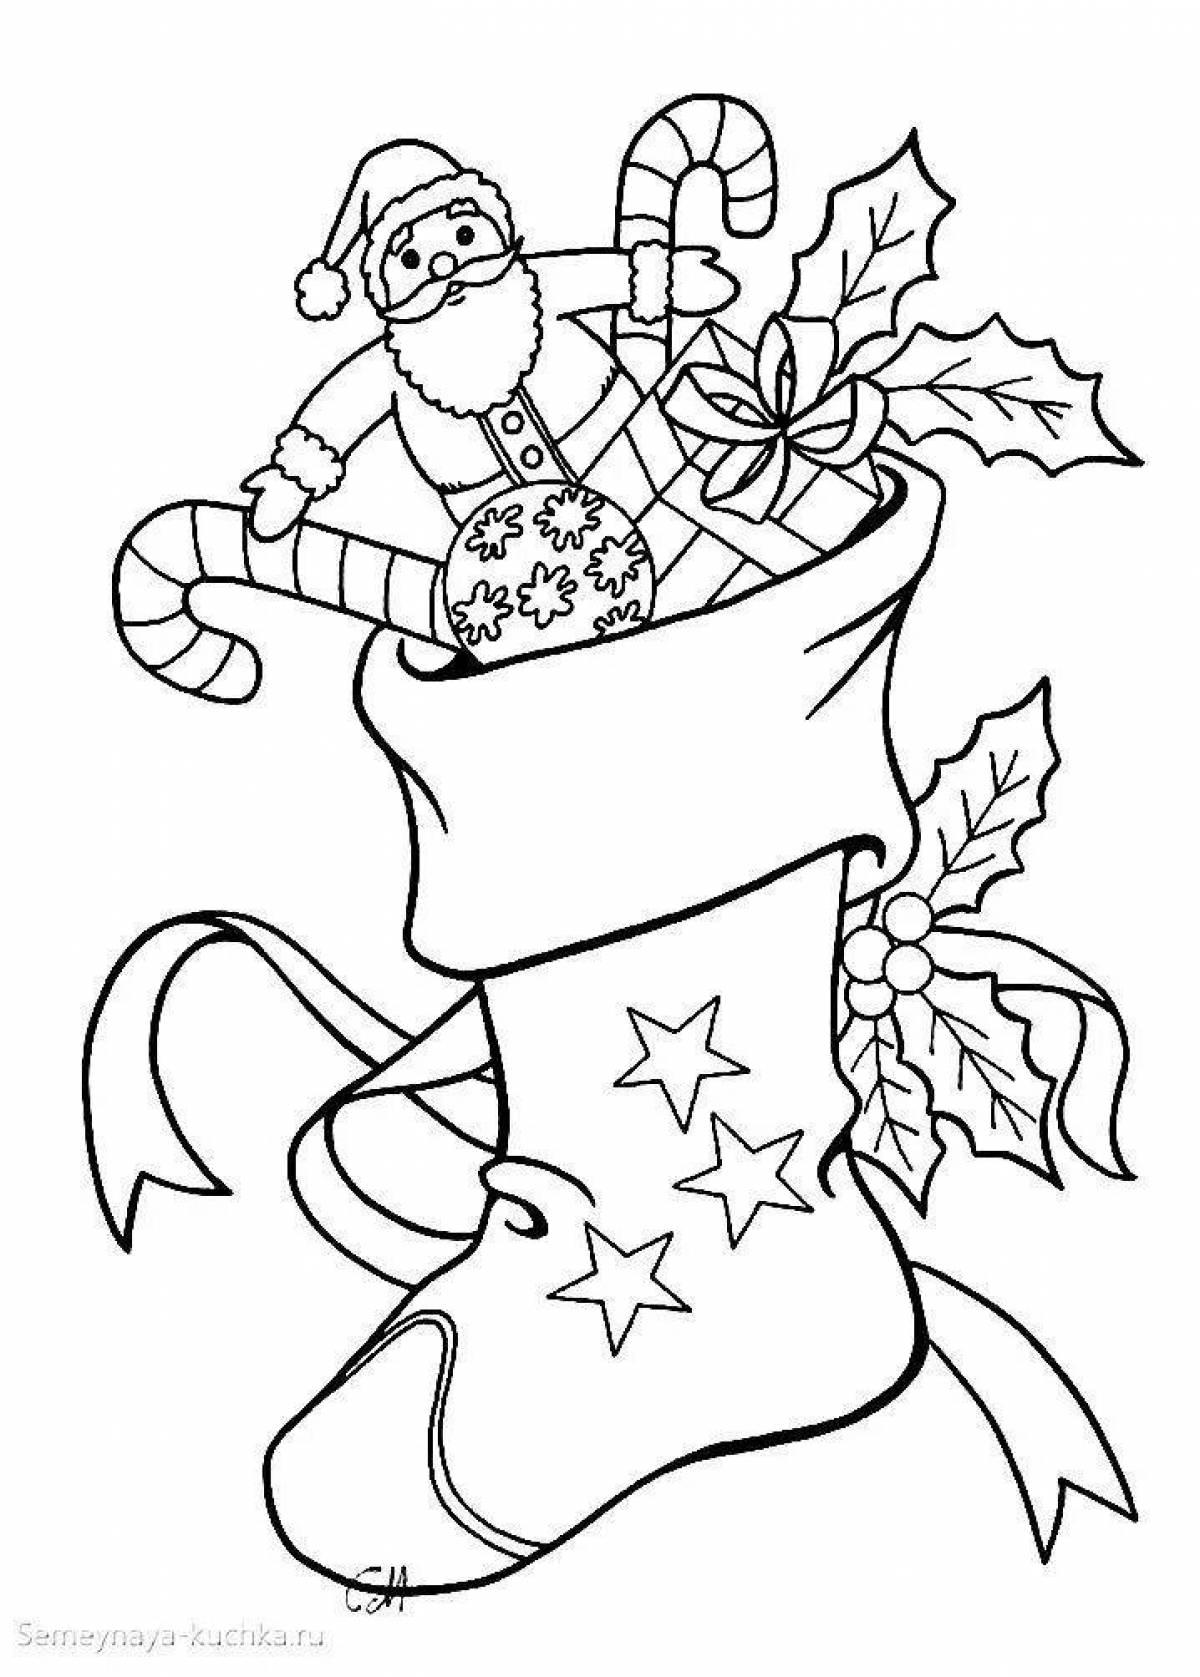 Grand Christmas boot coloring page